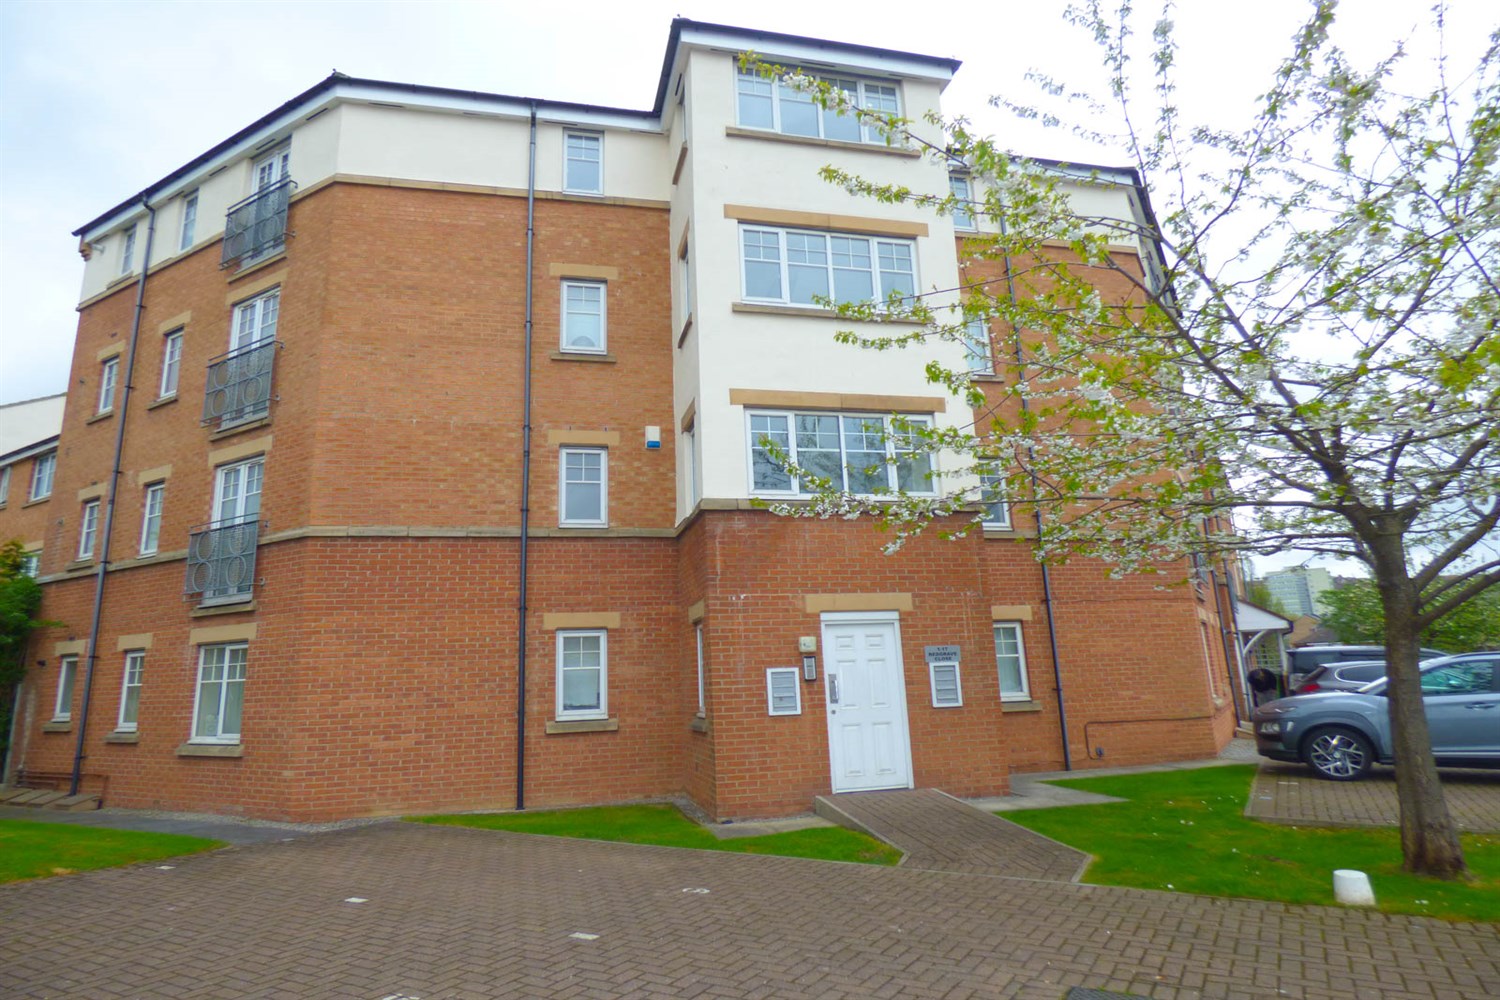 2 bed apartment to rent in Redgrave Close, Gateshead - Property Image 1